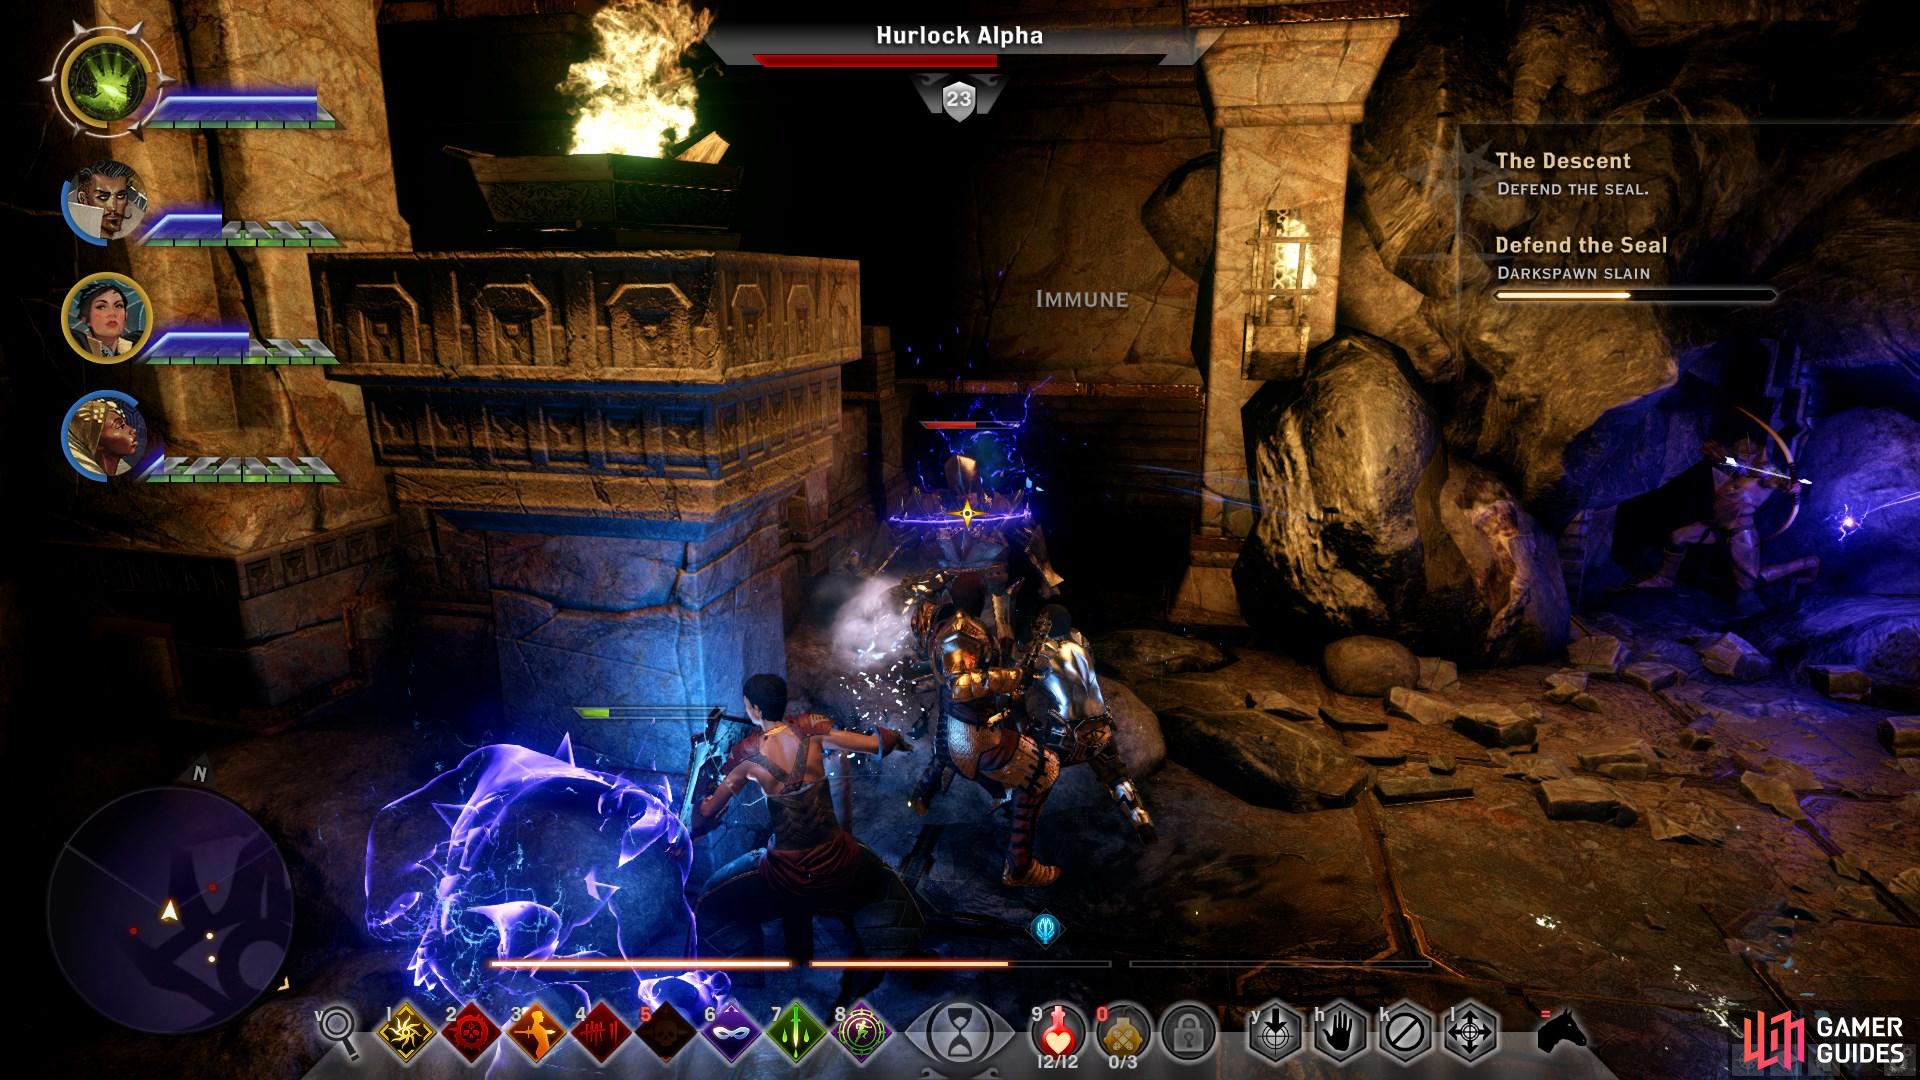 Hurlock Alpha's are the most powerful darkspawn that you'll encounter in this wave. Be sure to avoid their AoE attacks.